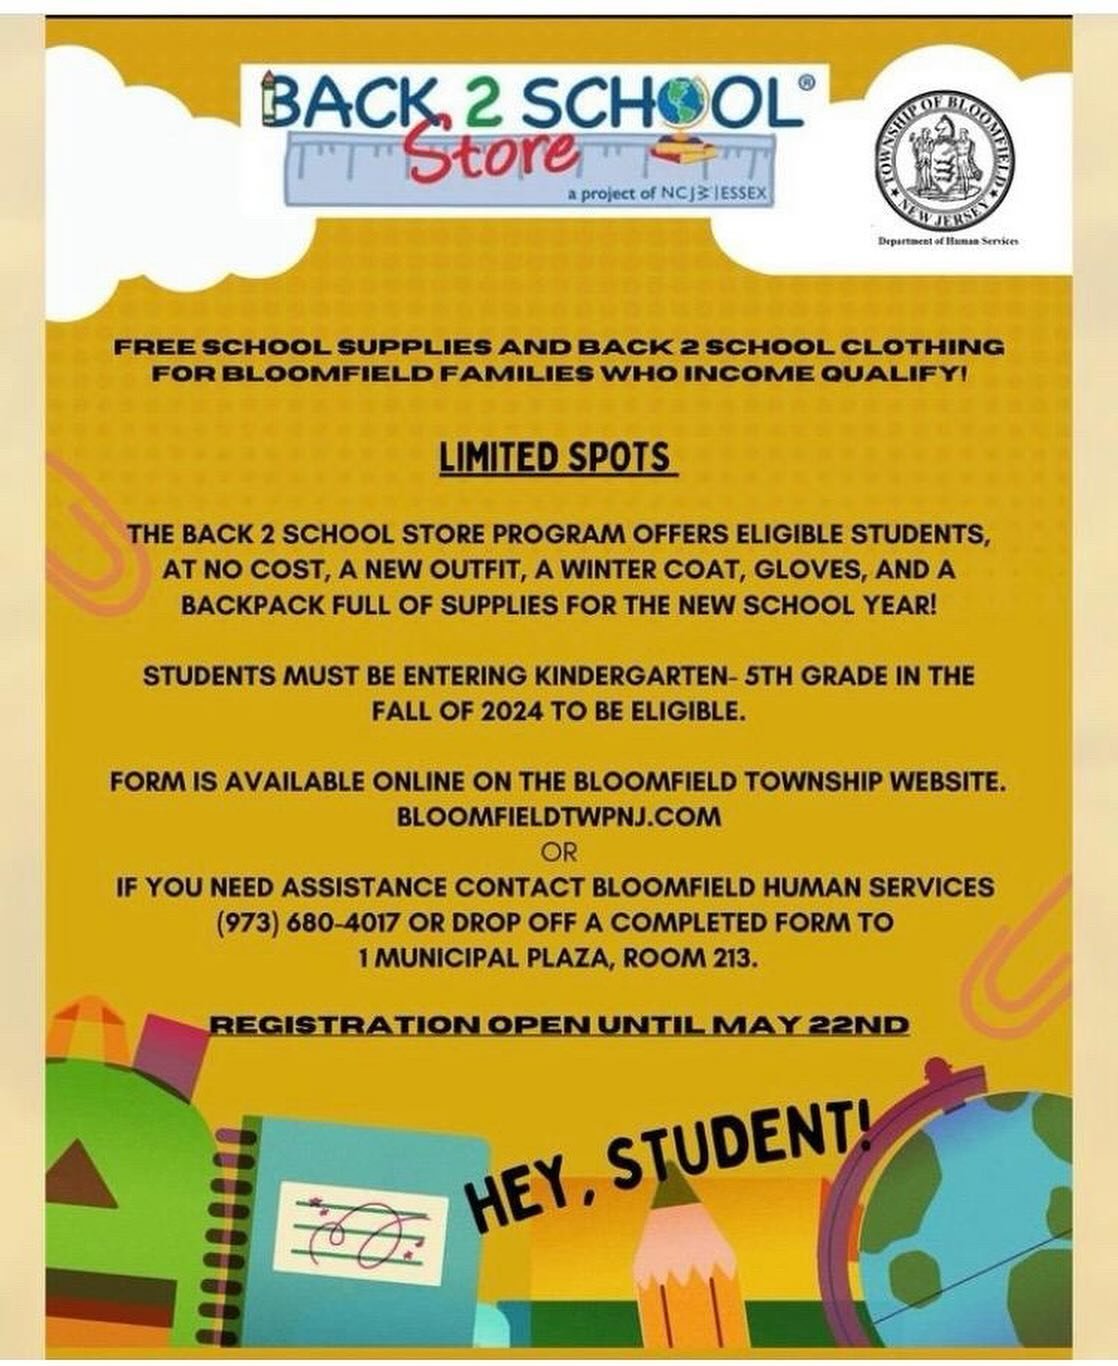 BACK, 2 SCHOOL STORE&reg;

a project of NCJ3 |ESSEX

FREE SCHOOL SUPPLIES AND BACK 2 SCHOOL CLOTHING FOR BLOOMFIELD FAMILIES WHO INCOME QUALIFY!

LIMITED SPOTS

THE BACK 2 SCHOOL STORE PROGRAM OFFERS ELIGIBLE STUDENTS, AT NO COST, A NEW OUTFIT, A WIN